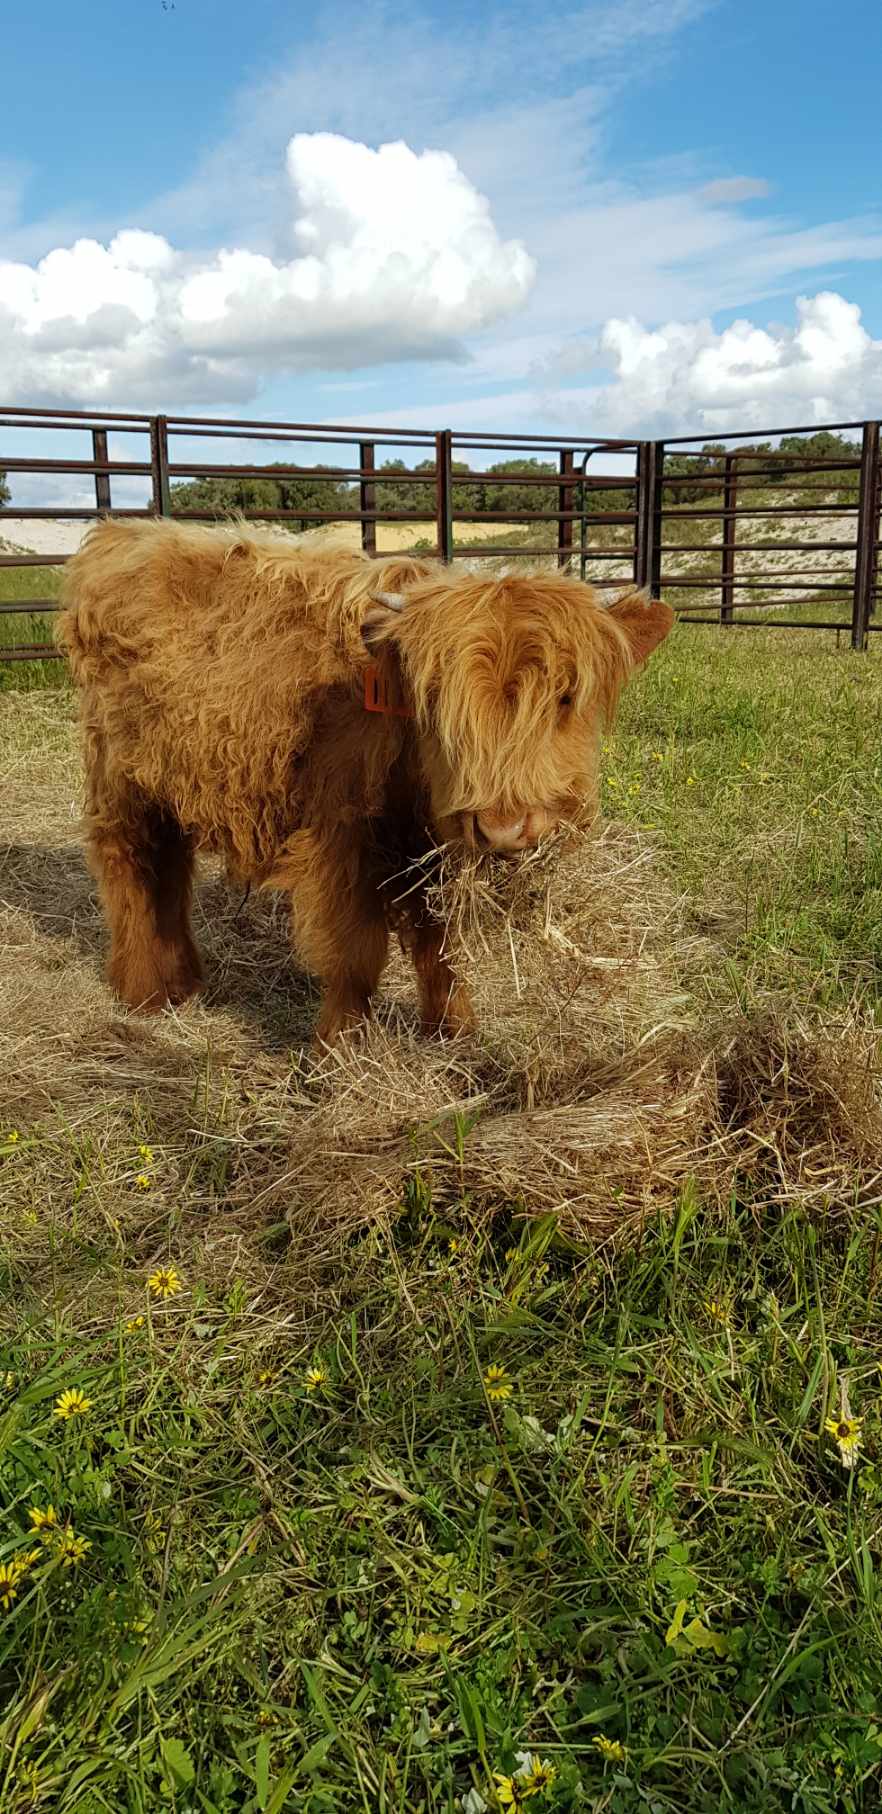 Meet Ferdinand the baby bull he’s my daughters love of her life . Ferdinand is  in training school we are teaching him to be people friendly along with Luna our heifer snd Zephyr our white Highland steer.